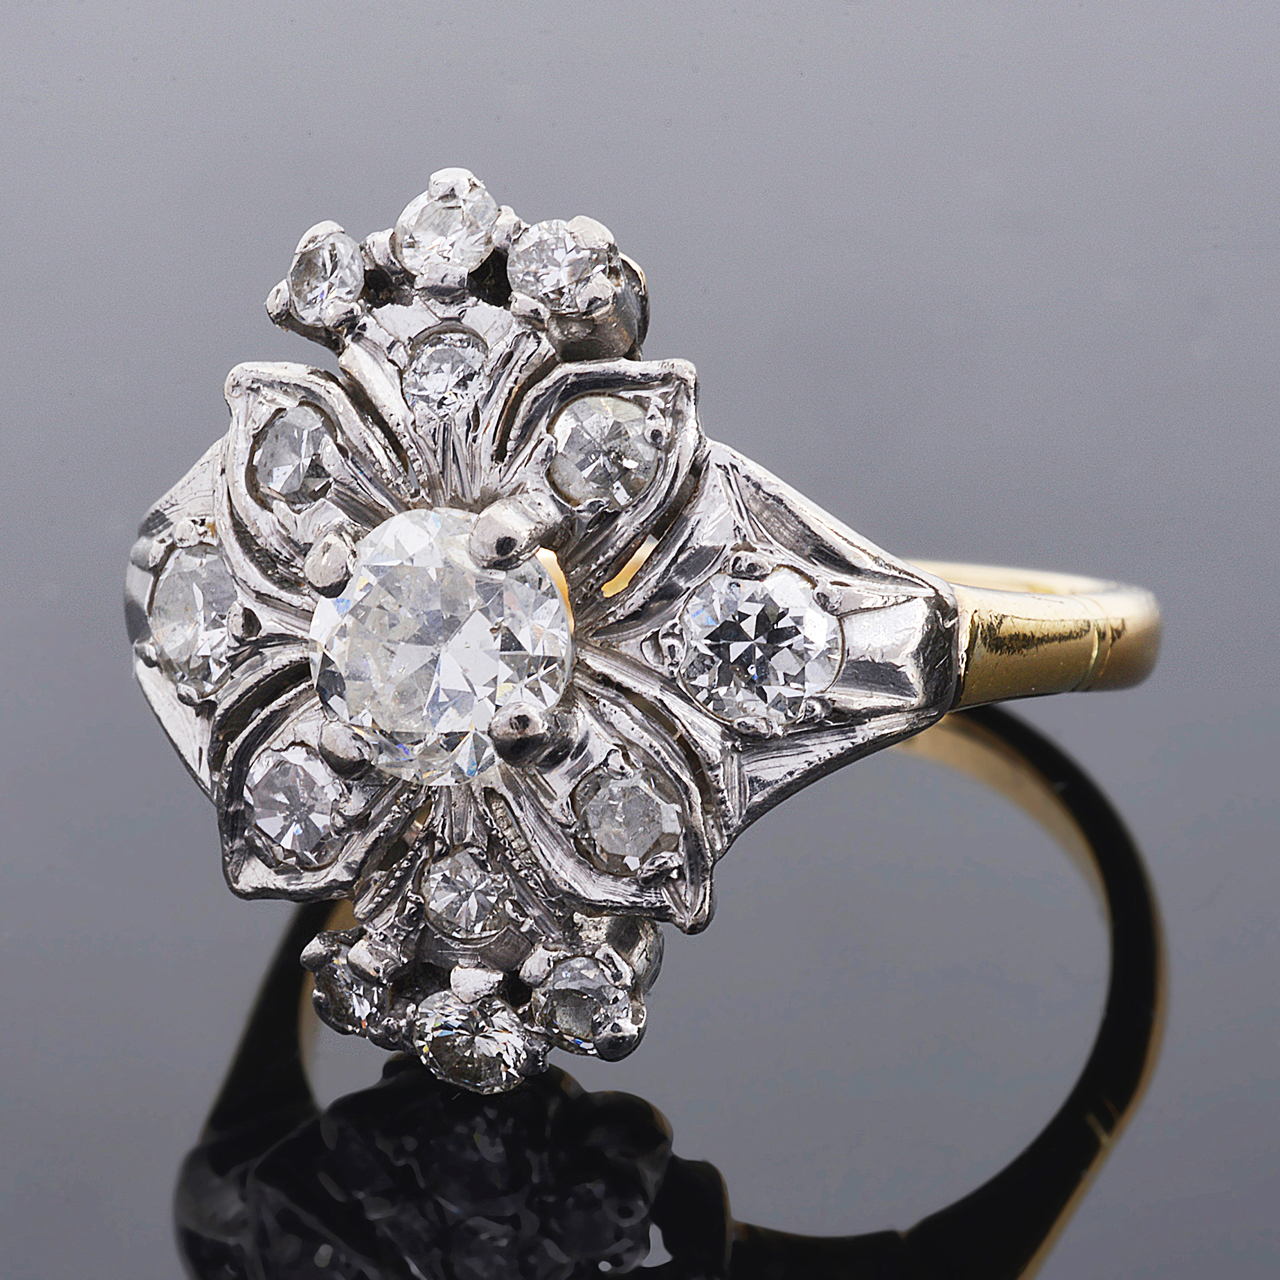 A 1940's diamond set fancy floral cluster cocktail ring